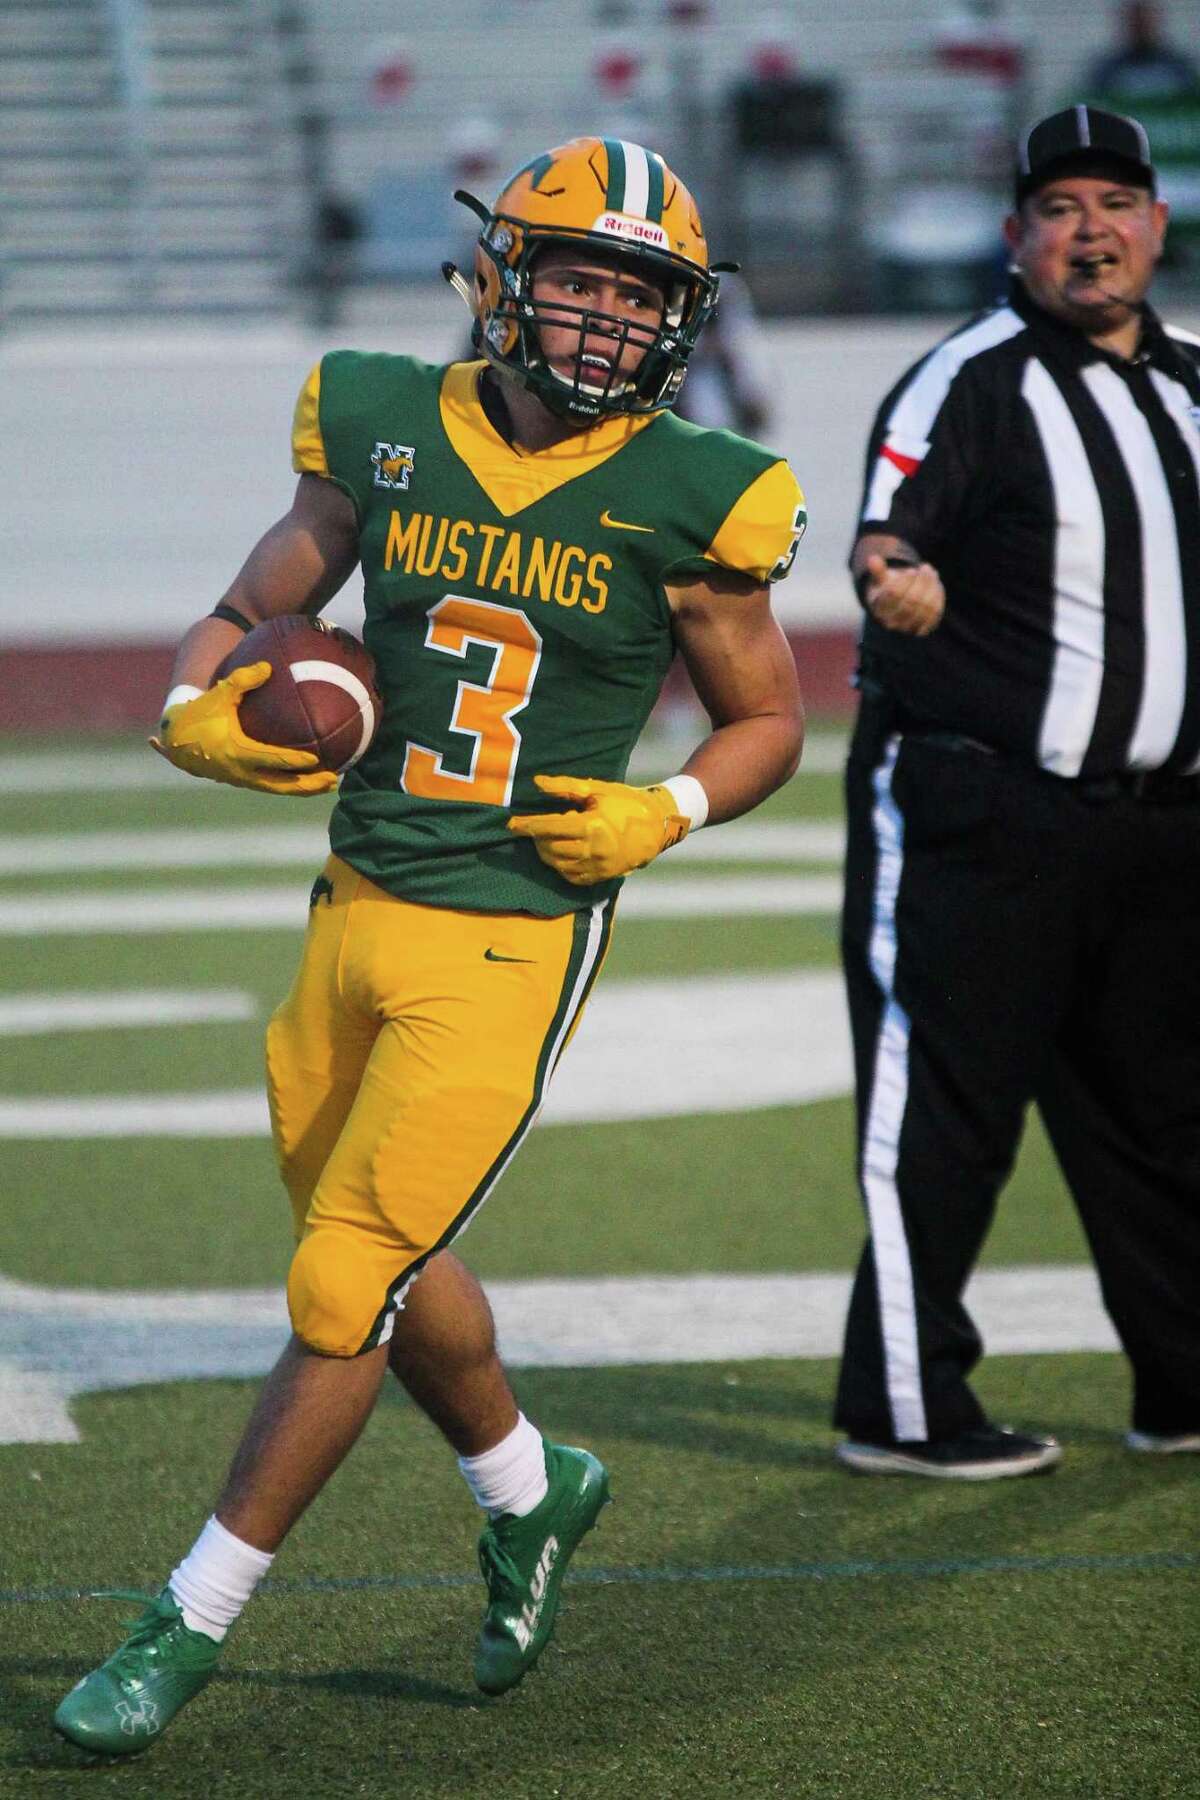 Running back Ben Limon rushed for three touchdowns in Nixon’s win over Corpus Christi King last week.